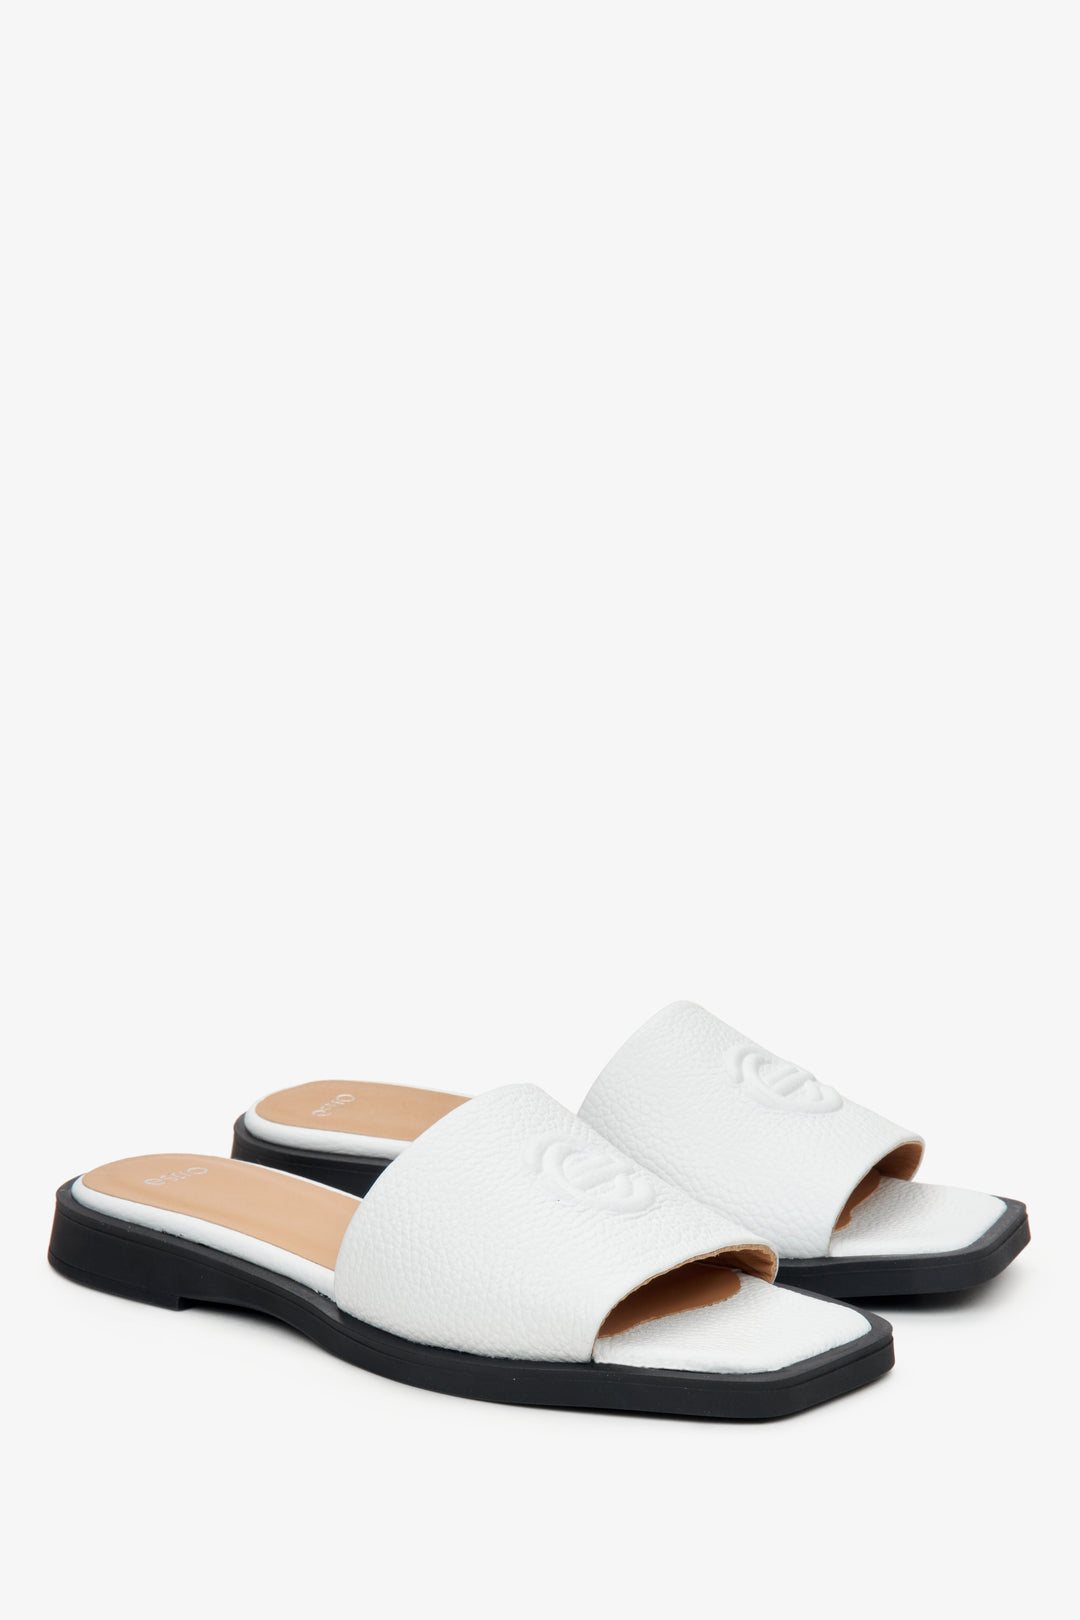 Women's white flip-flops made of genuine leather by Estro.